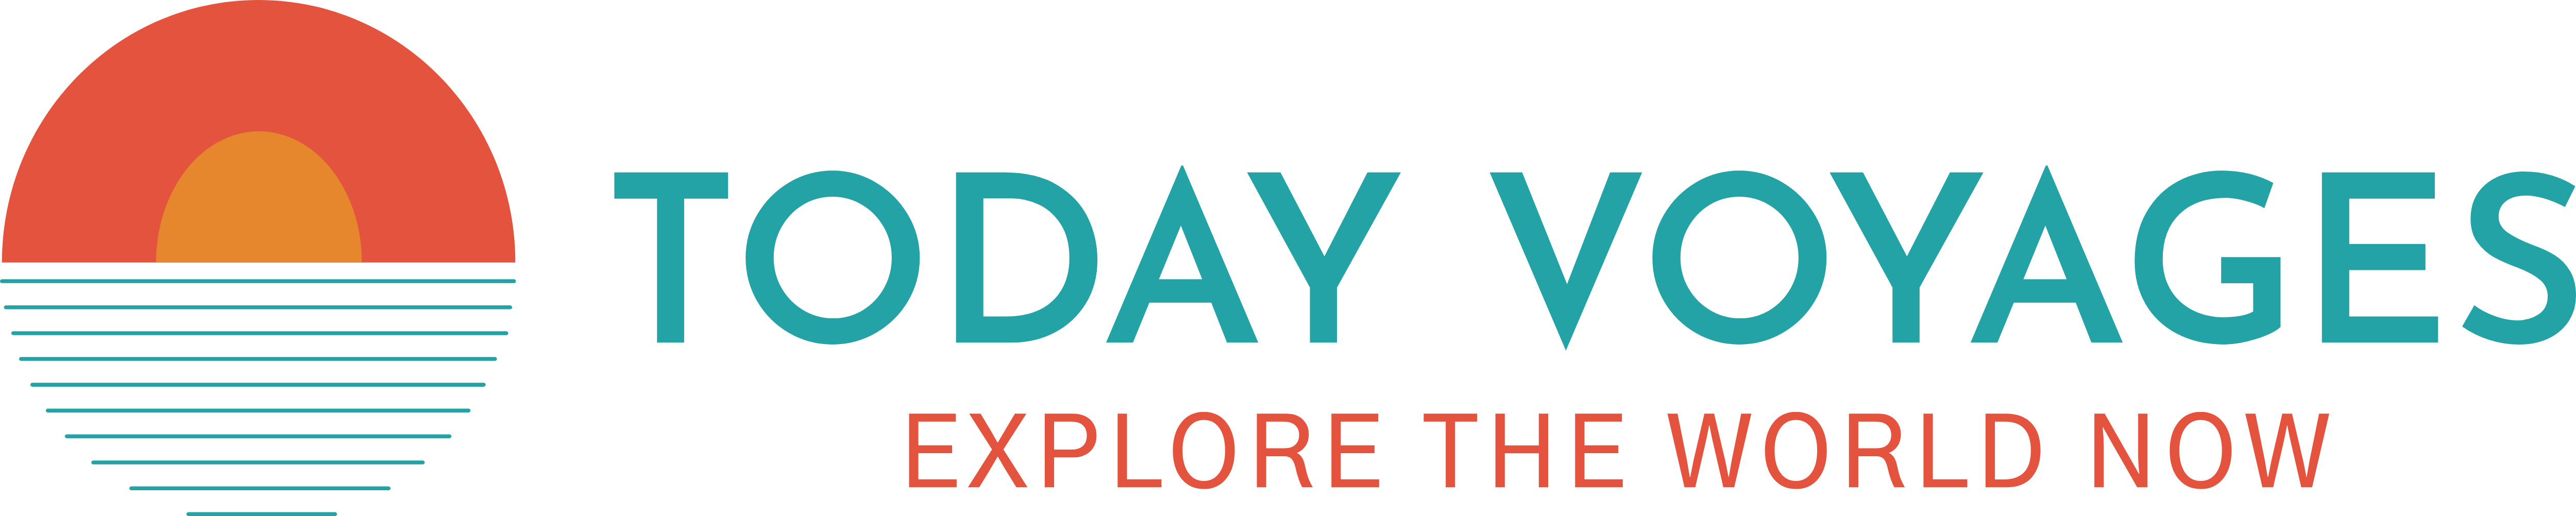 Today Voyages logo